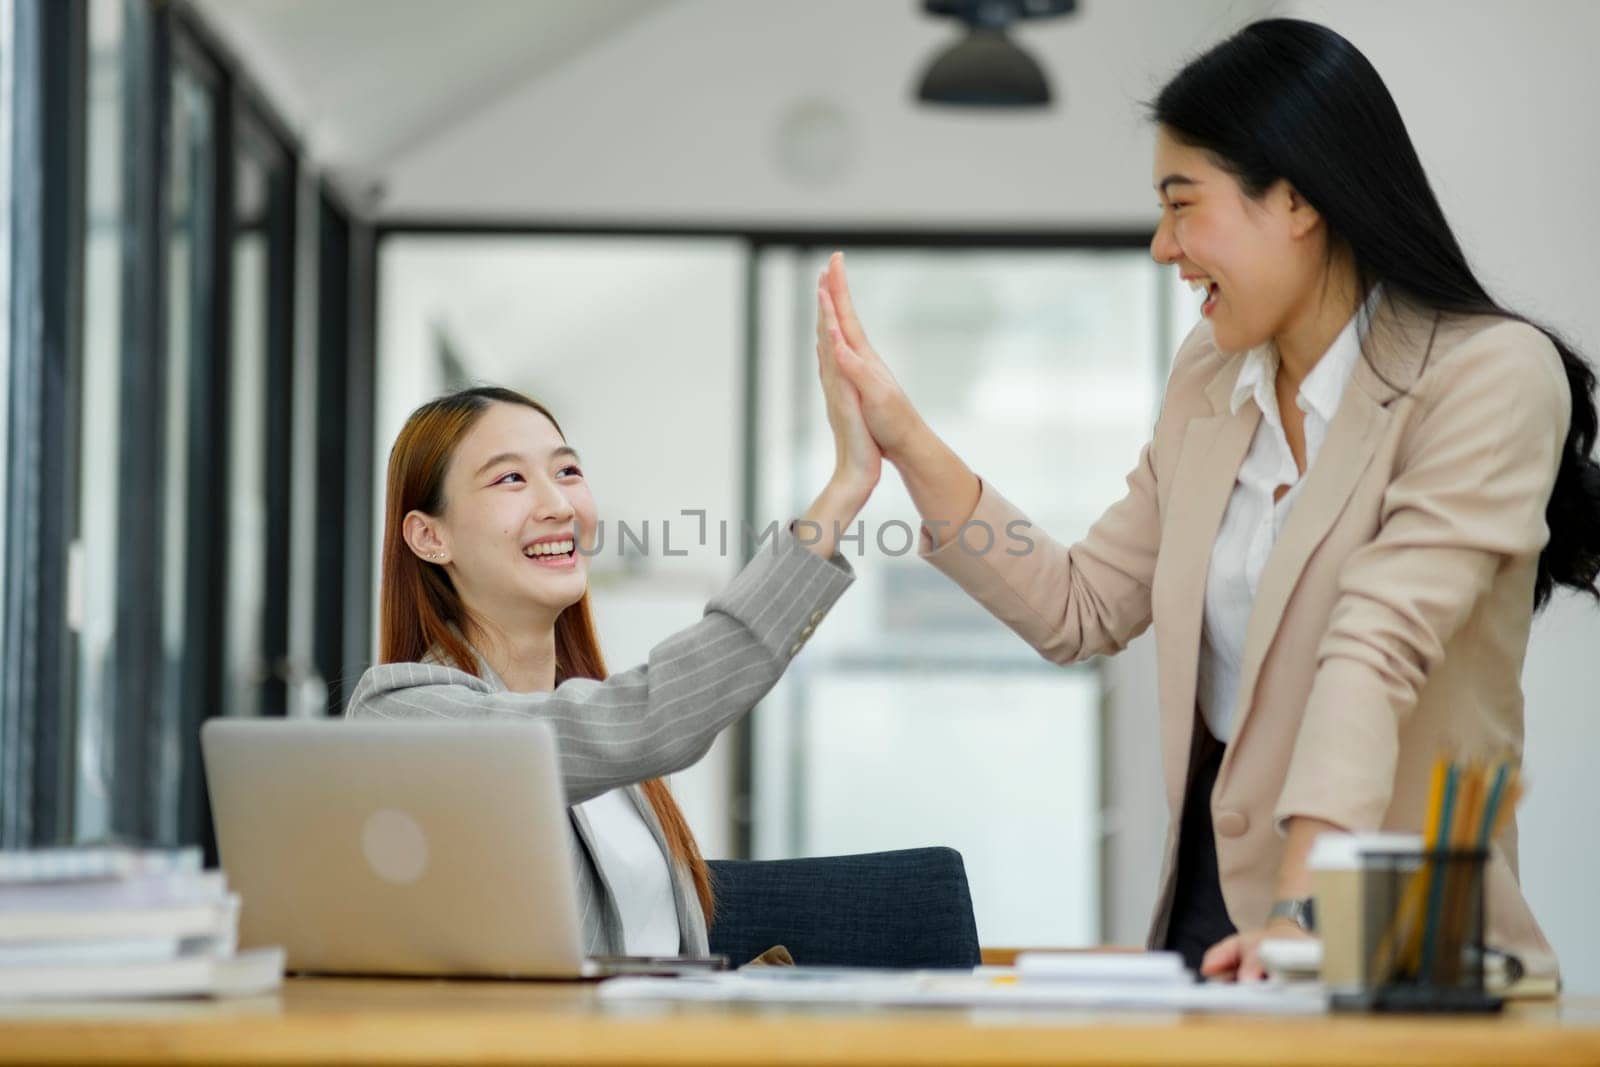 Two joyful businesswomen giving a high five in an office setting, celebrating a successful collaboration..